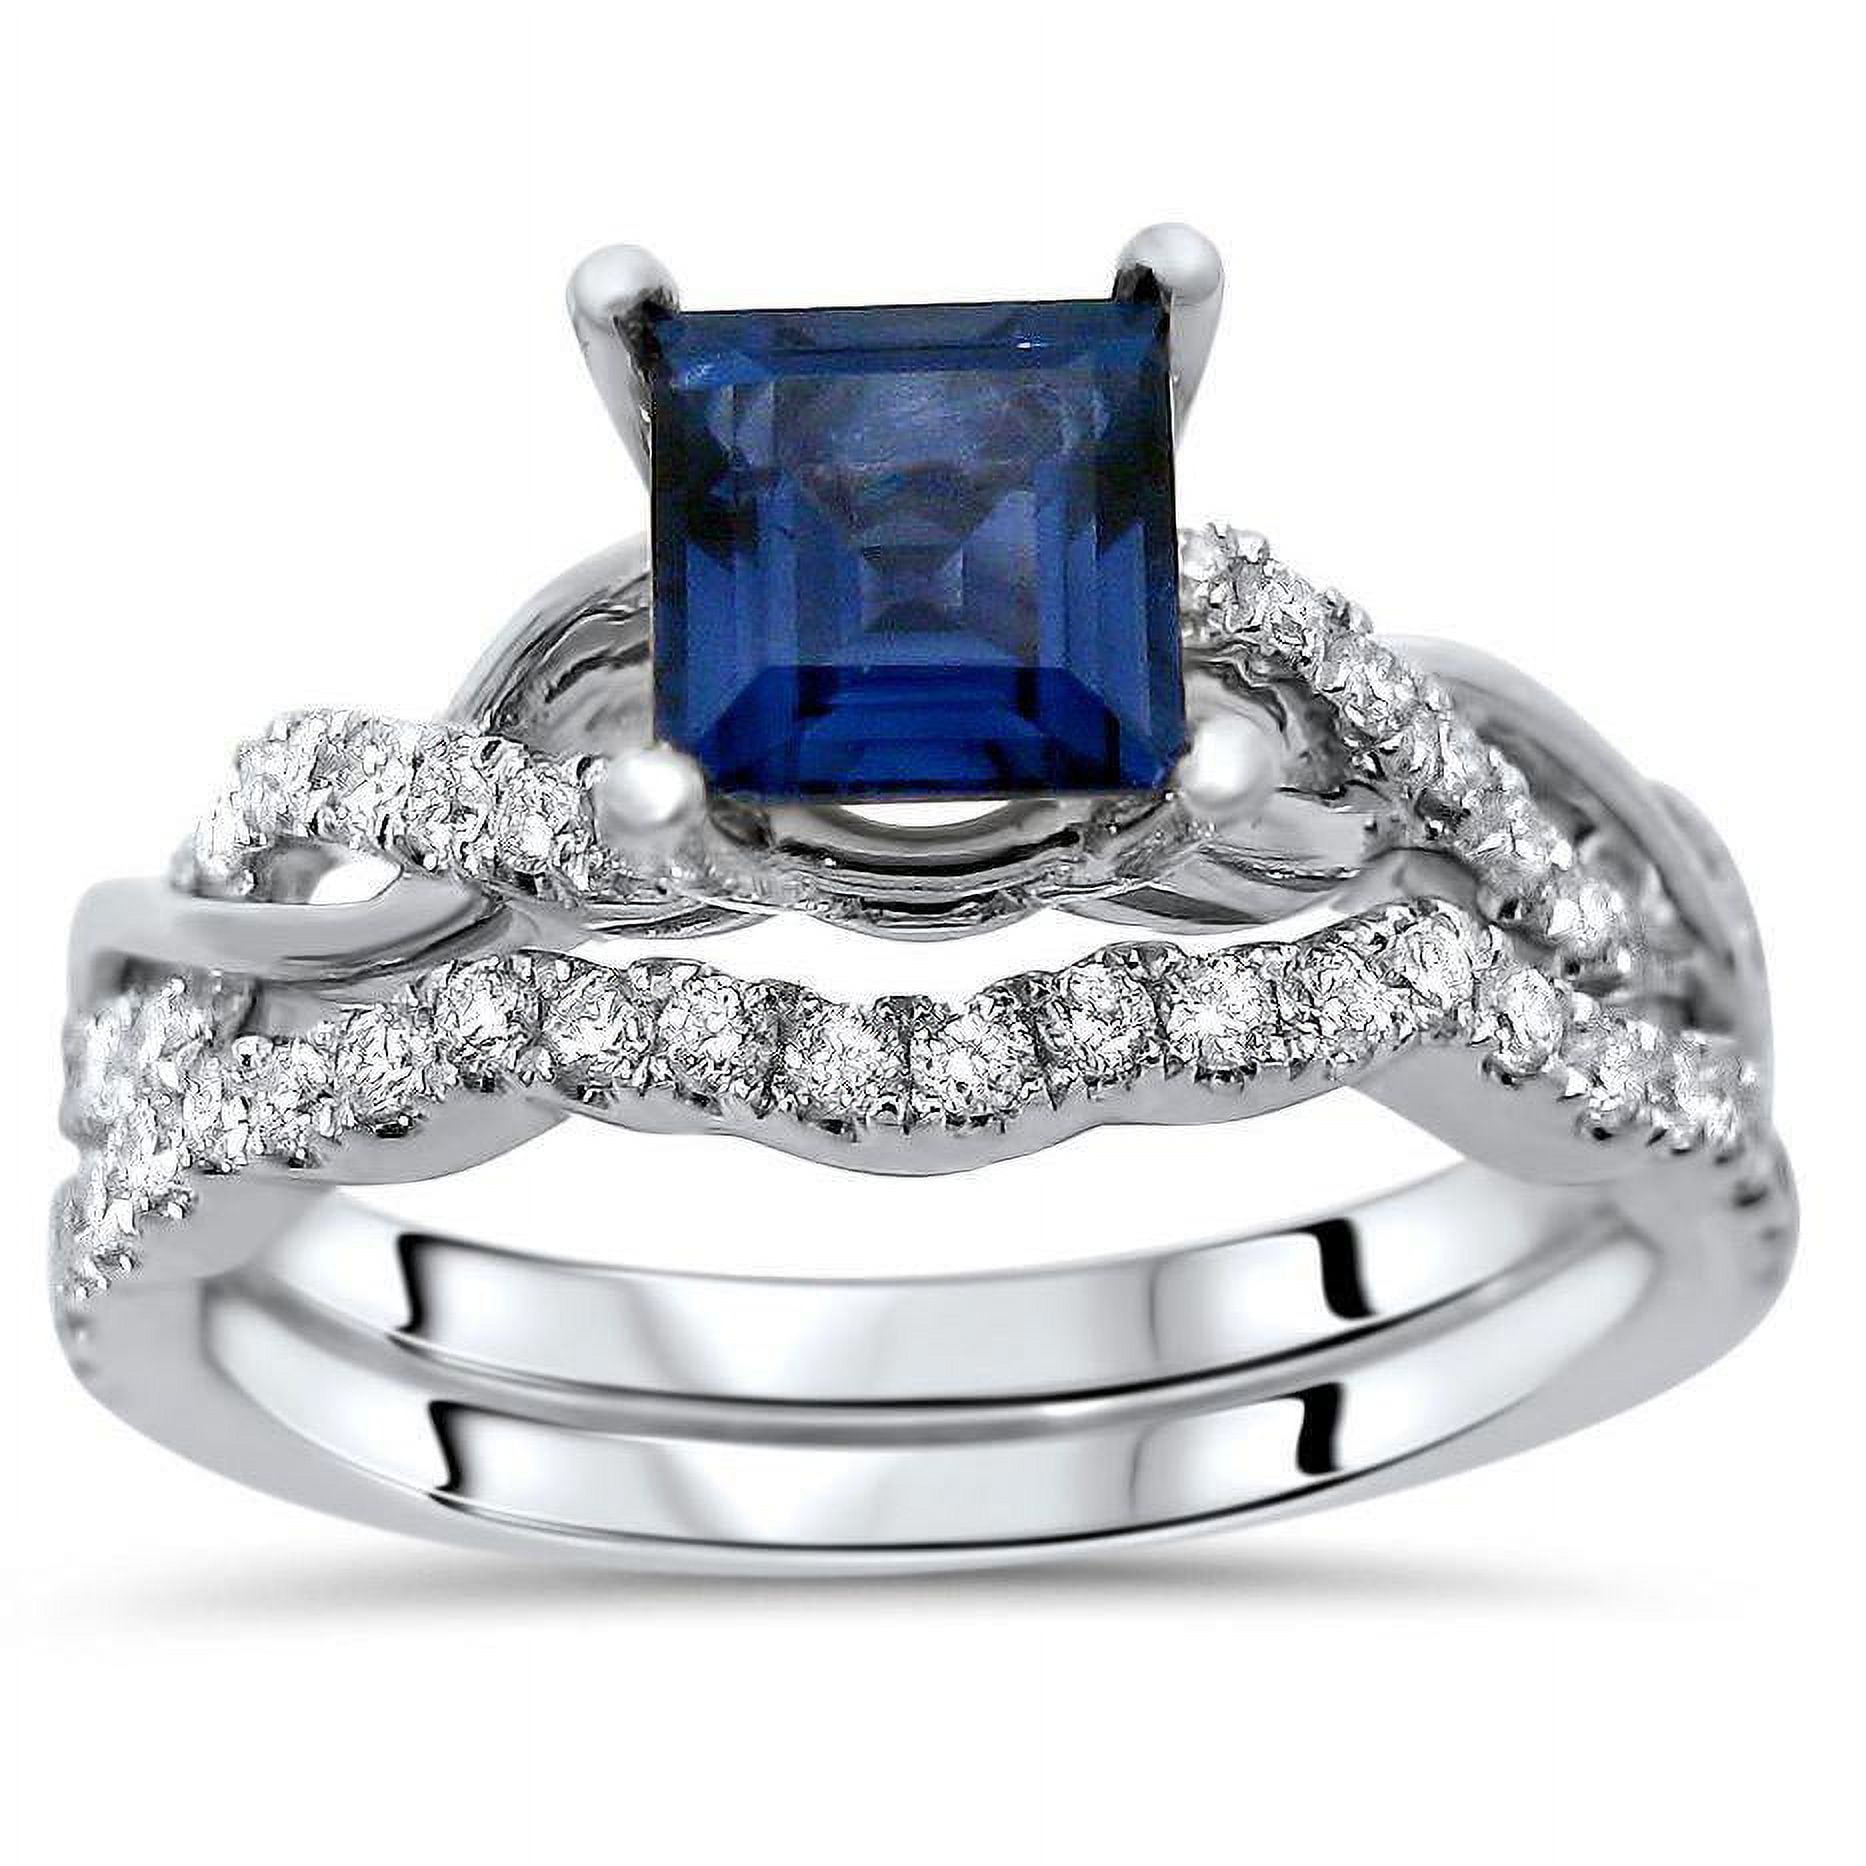 Limited Time Sale 1.50 carat Sapphire and Diamond Engagement Bridal ...